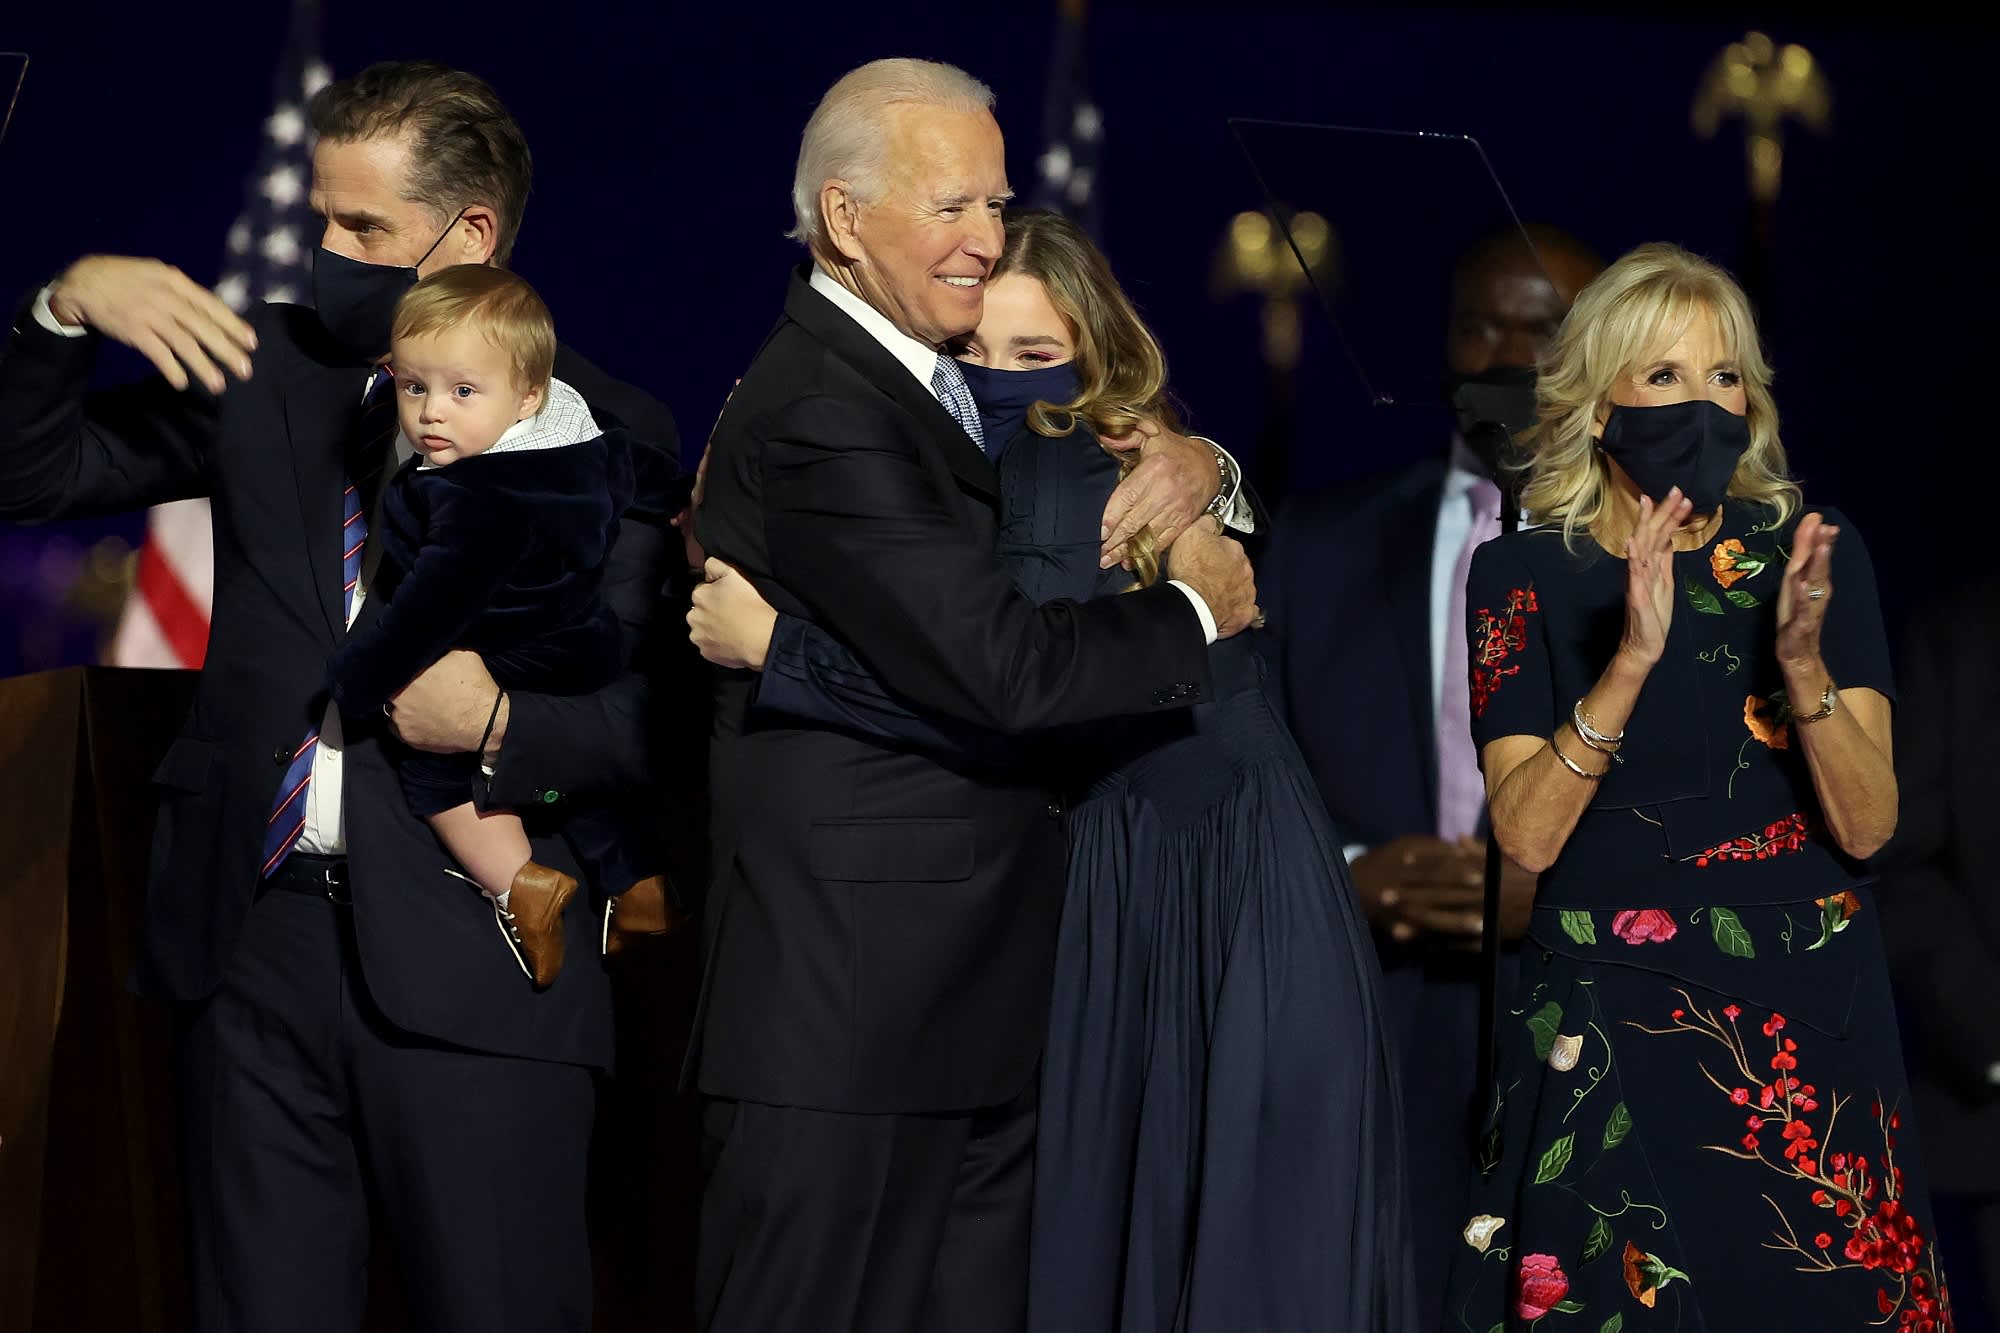 Read Joe Biden’s 2014 memo to staff about making time for family